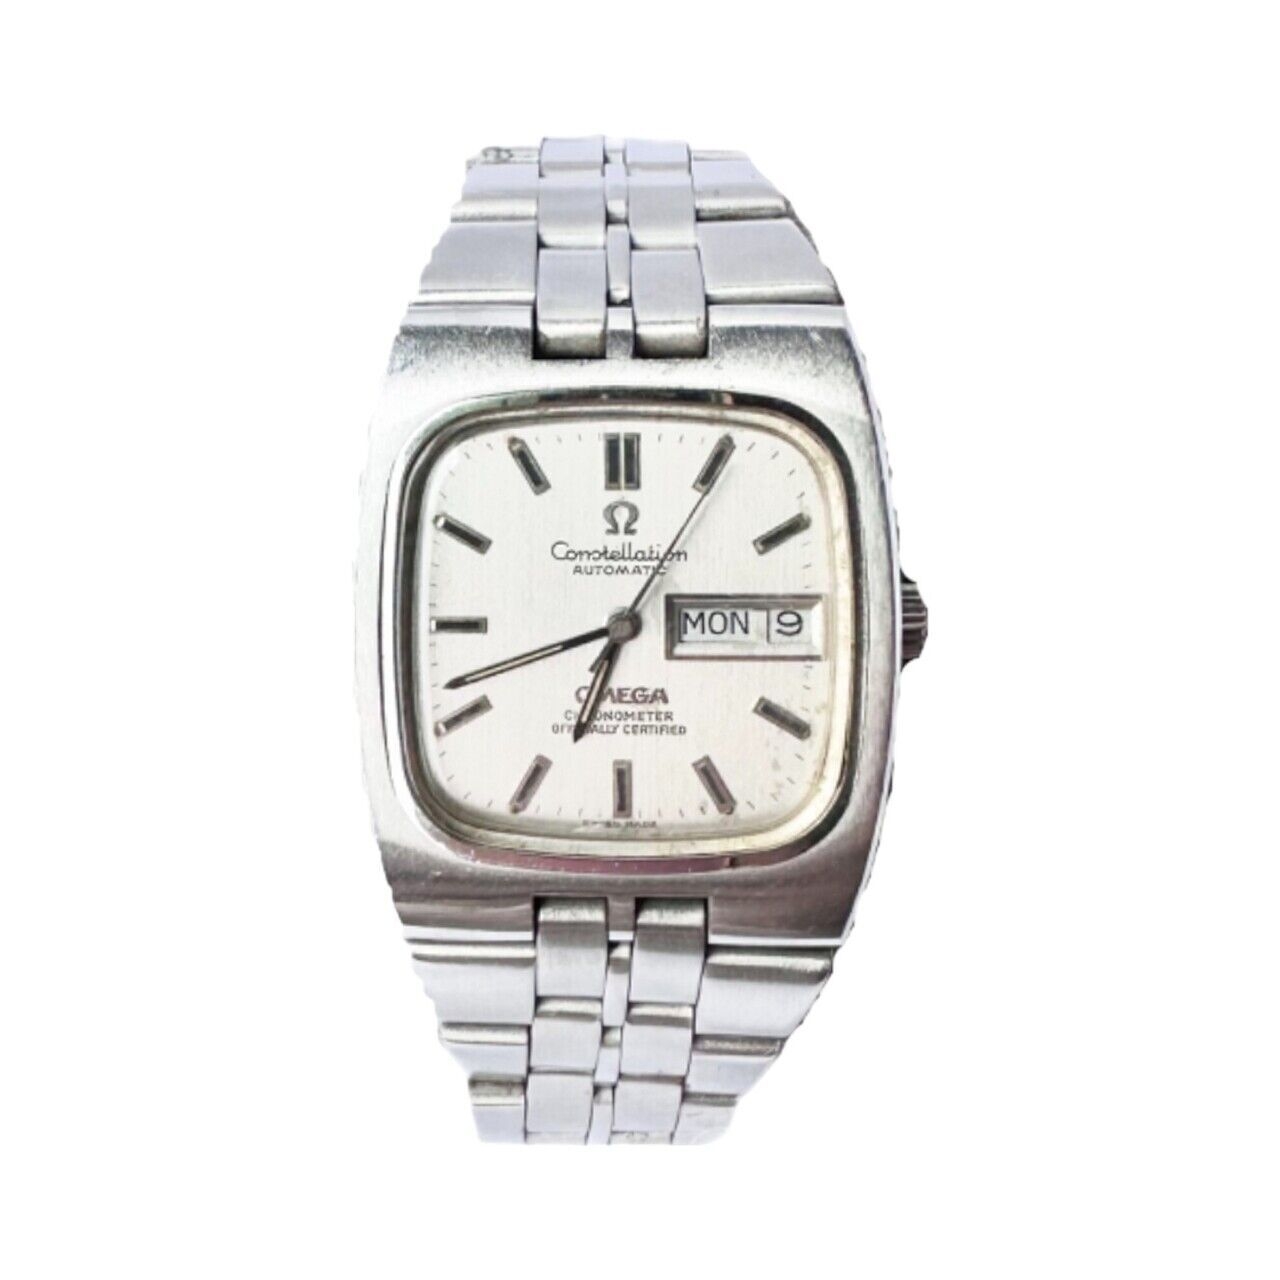 Omega Constellation Chronometer Automatic Day Date Silver Watch